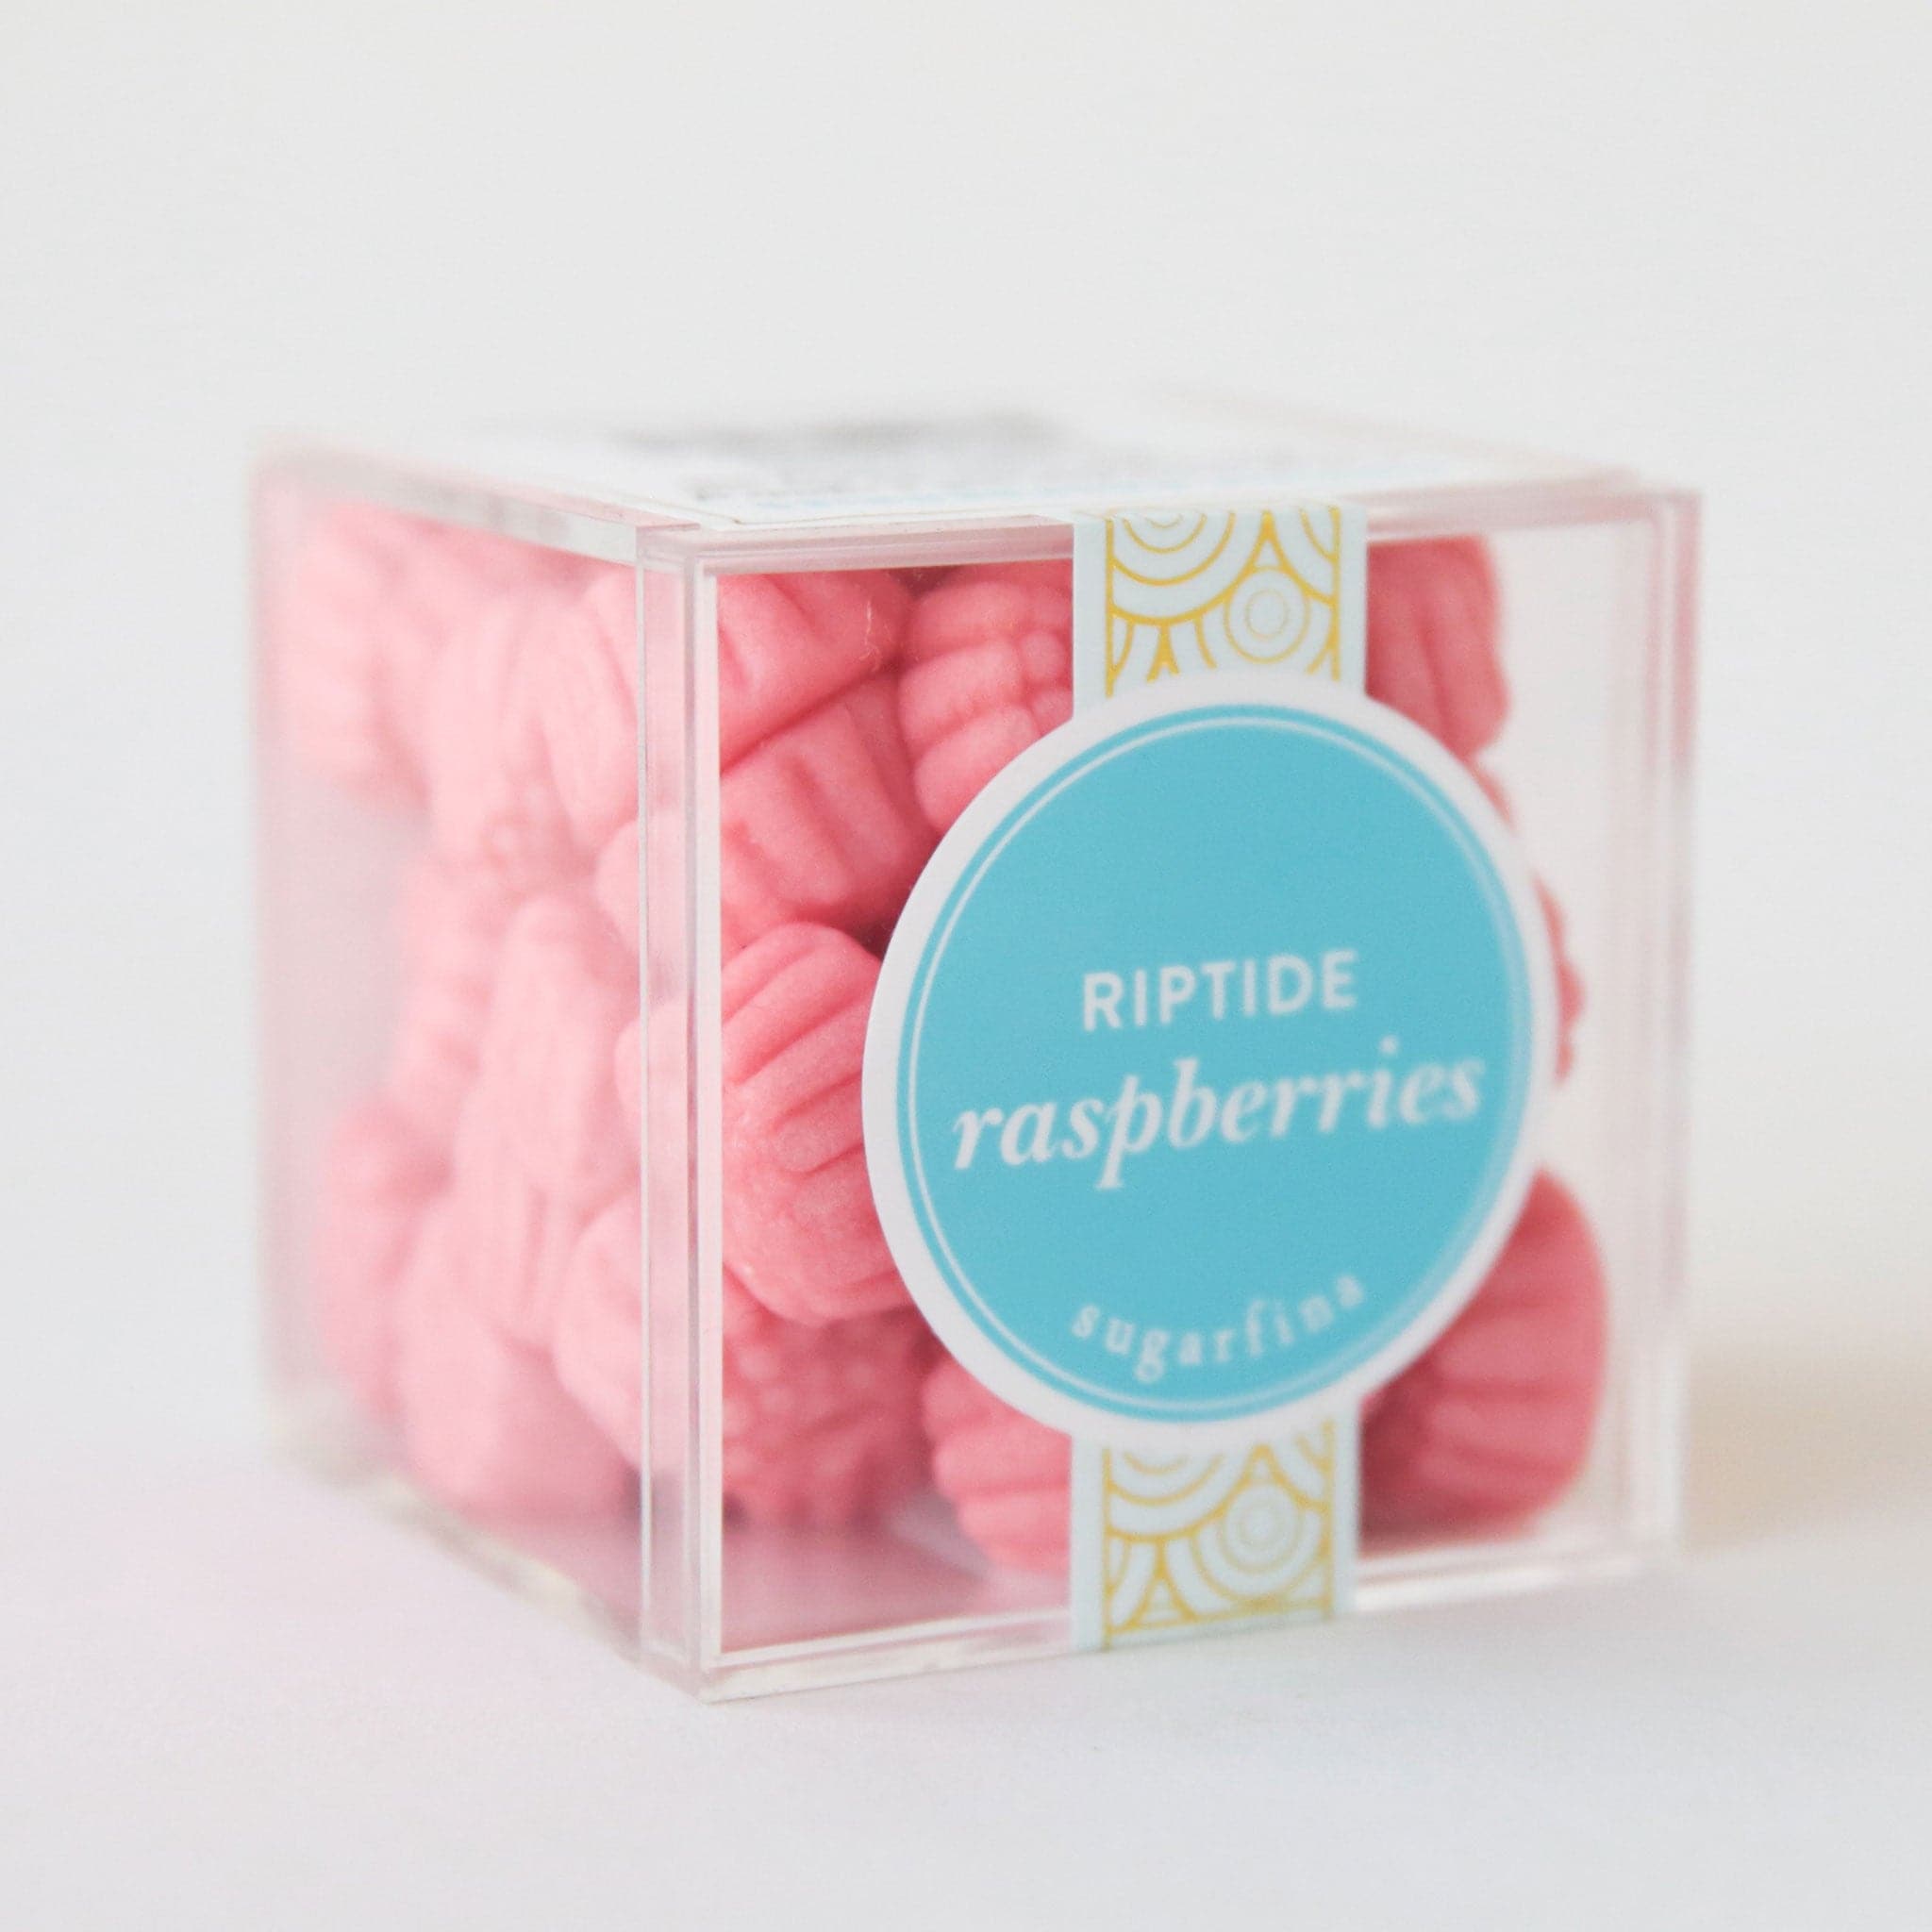 A clear acrylic packaging with pink raspberry shaped gummies.